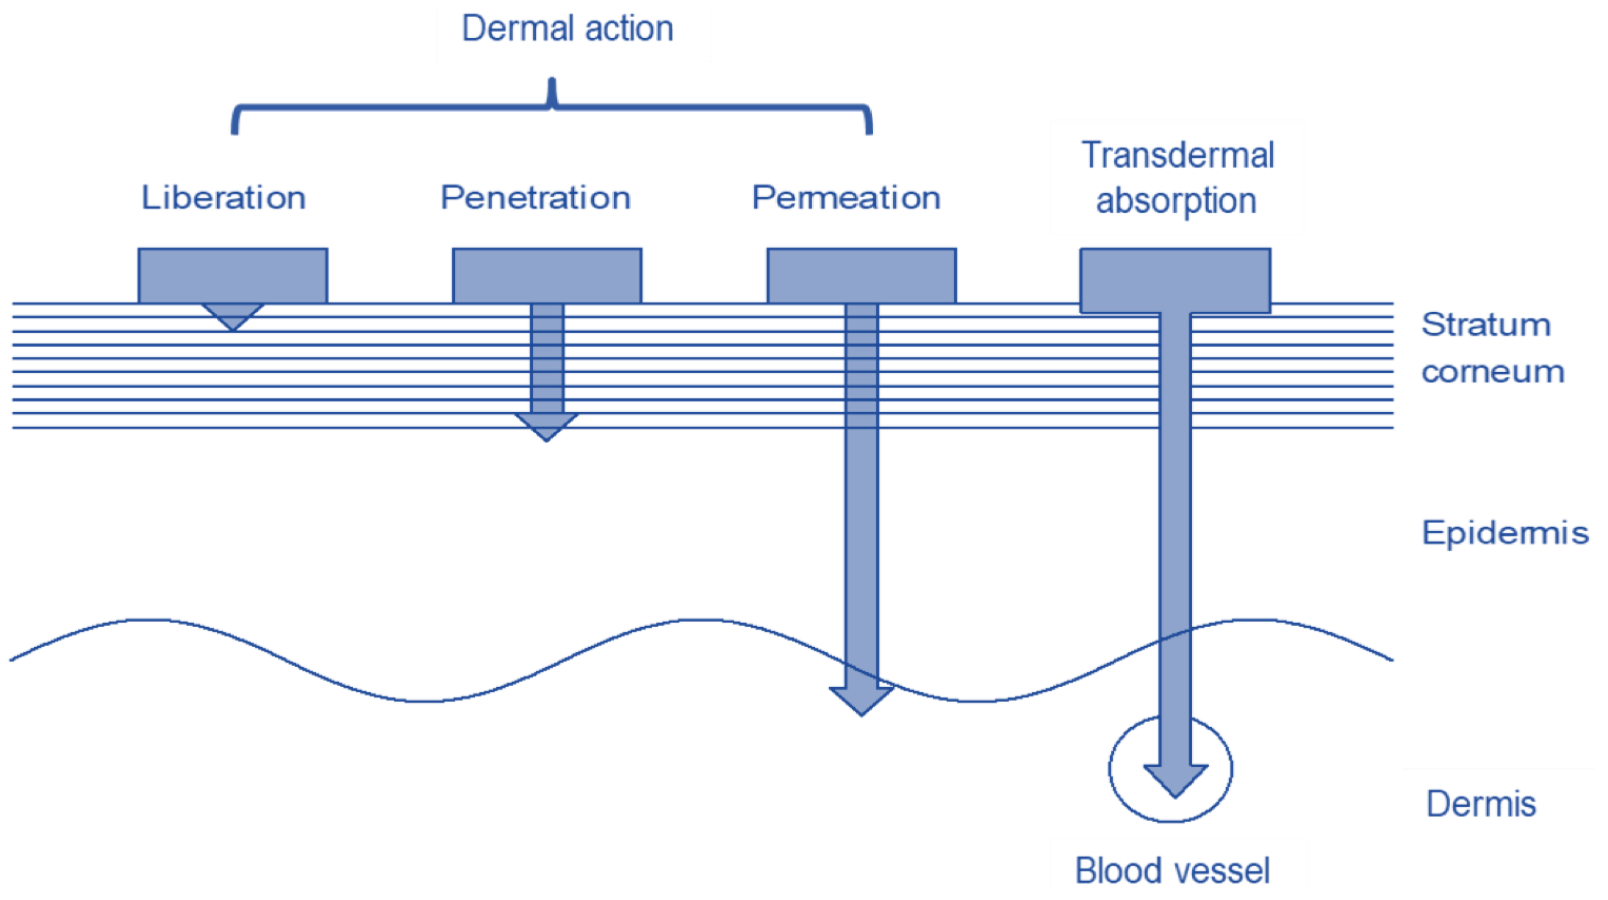 Structure of the skin with the different penetration depths of the dermal and transdermal systems